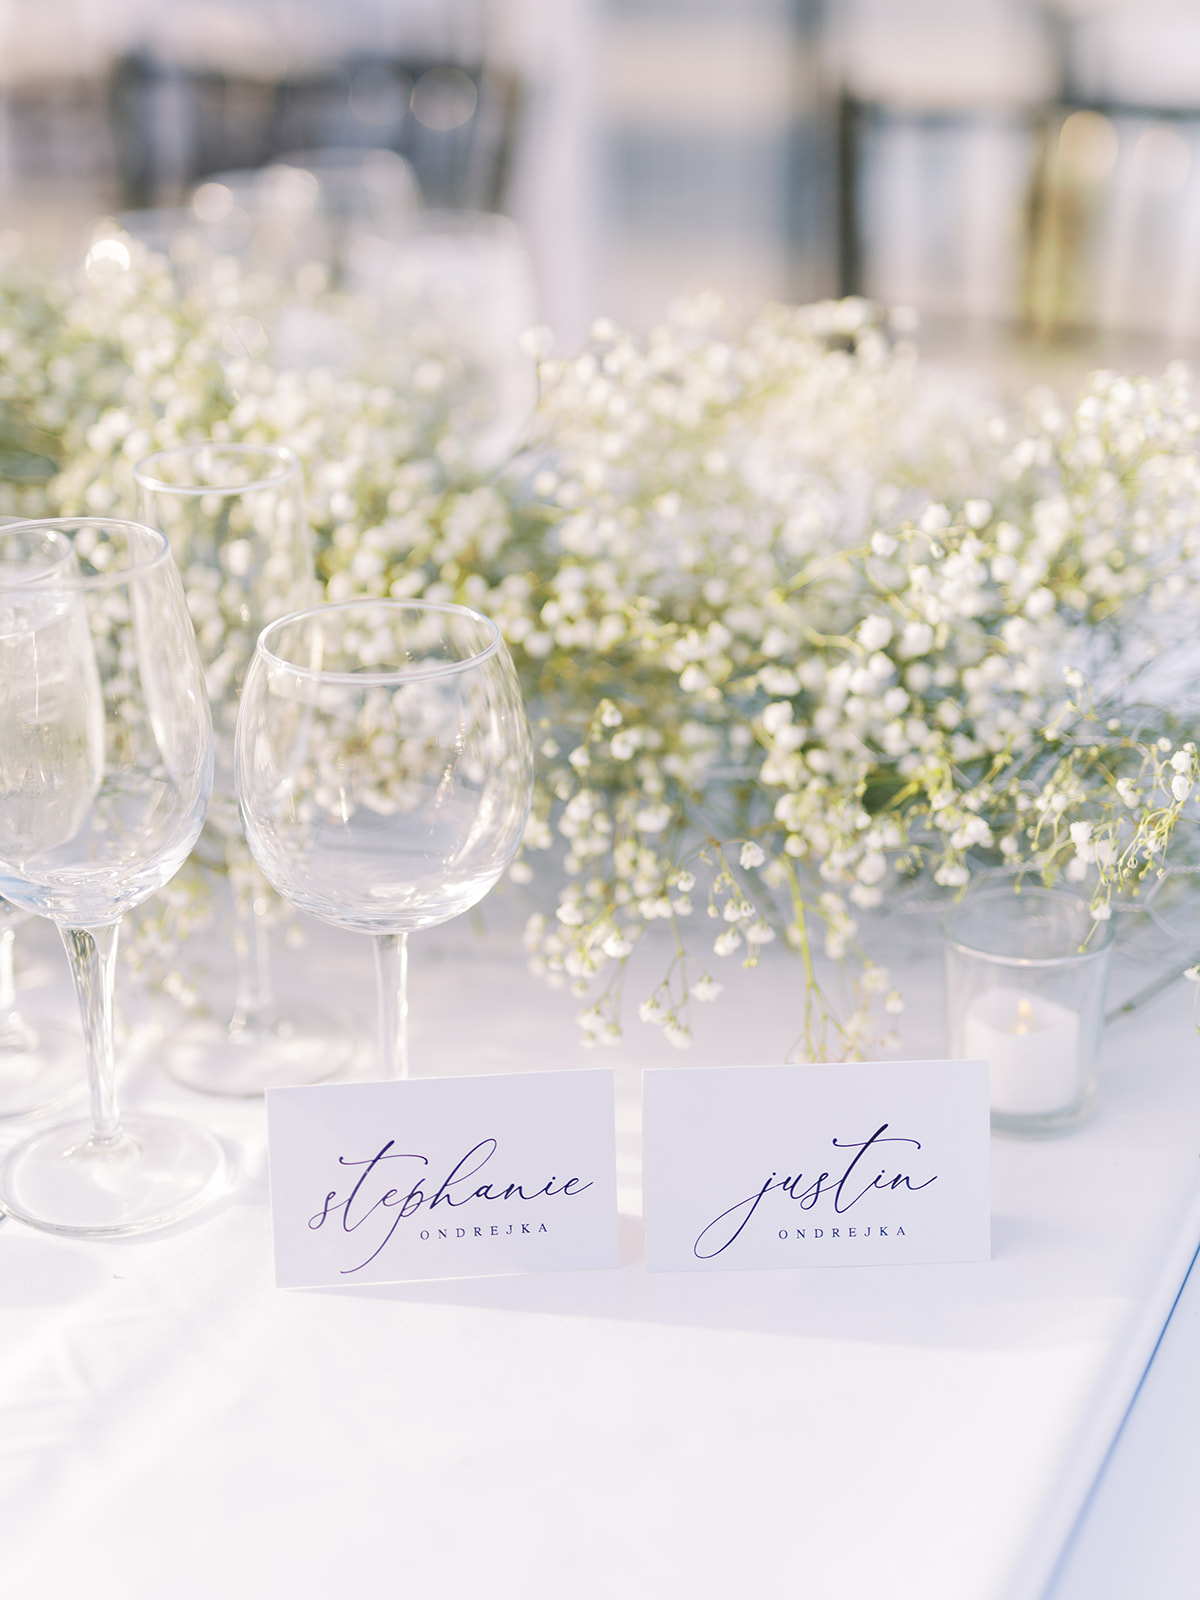 place cards for bride and groom with chic baby's breath floral arrangements for sunny summer wedding